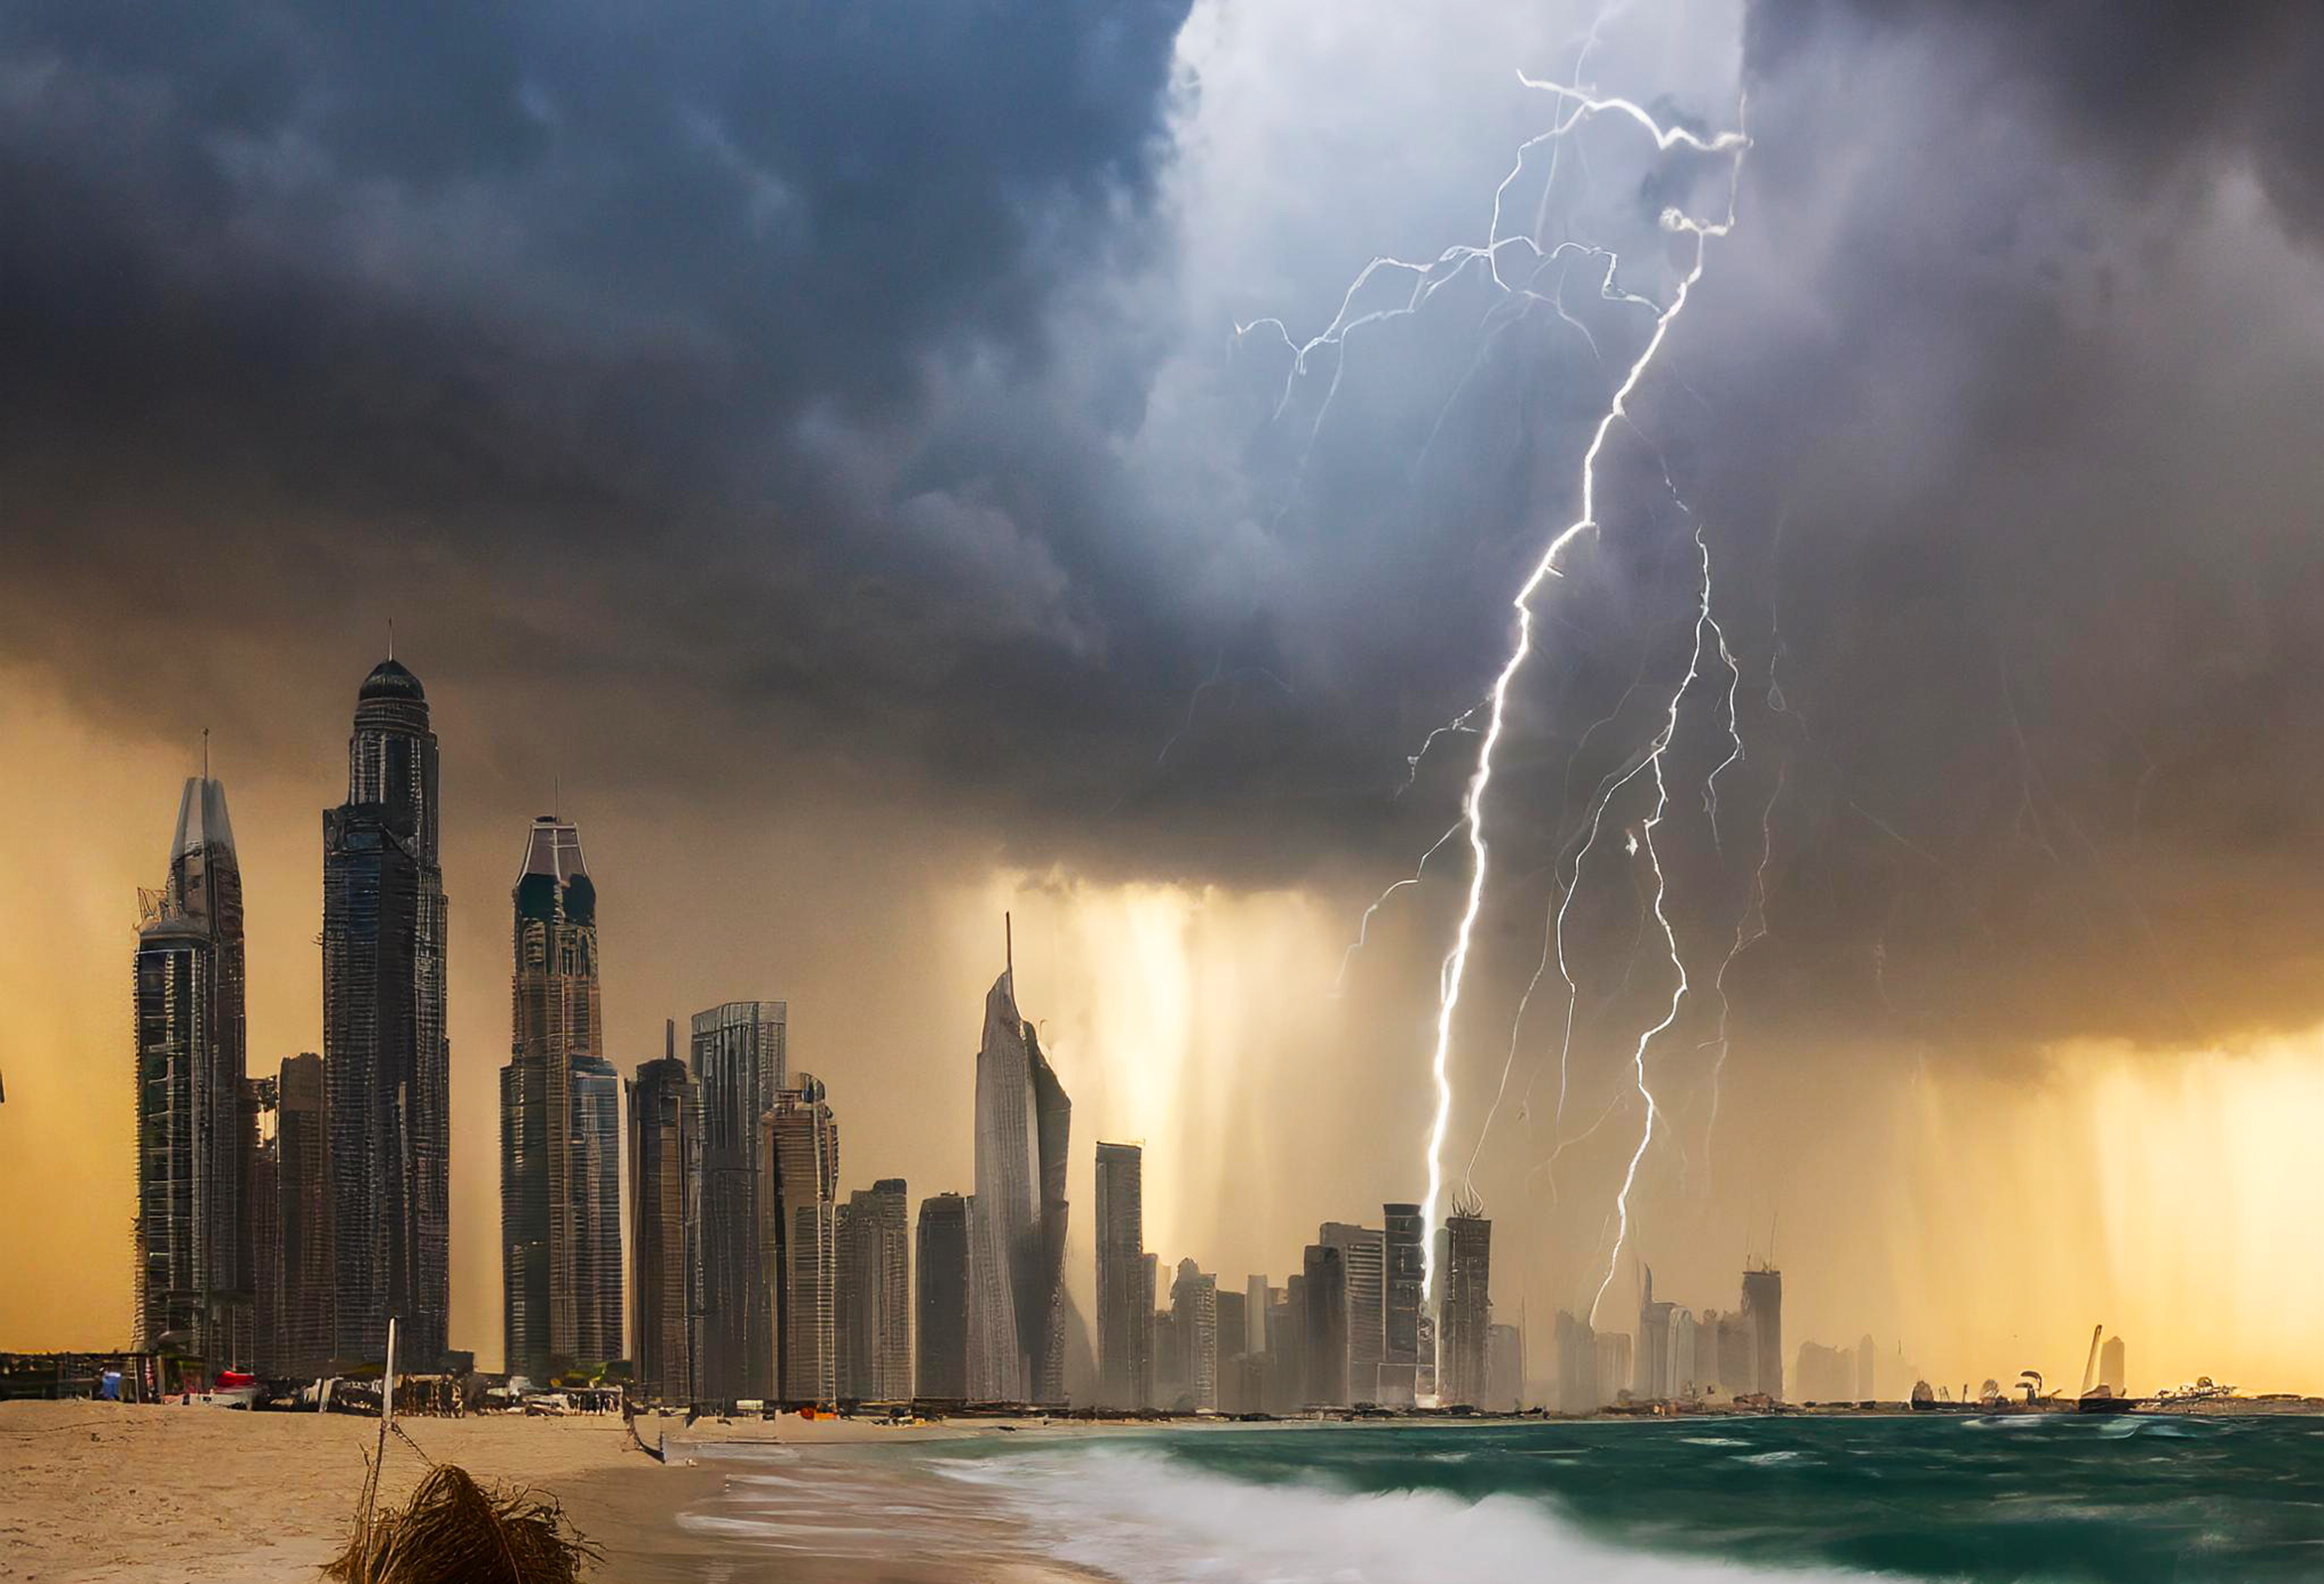 Schools braced for floods as rain heads for UAE and major urban and school centres in Dubai and Abu Dhabi - particularly around coastal communities